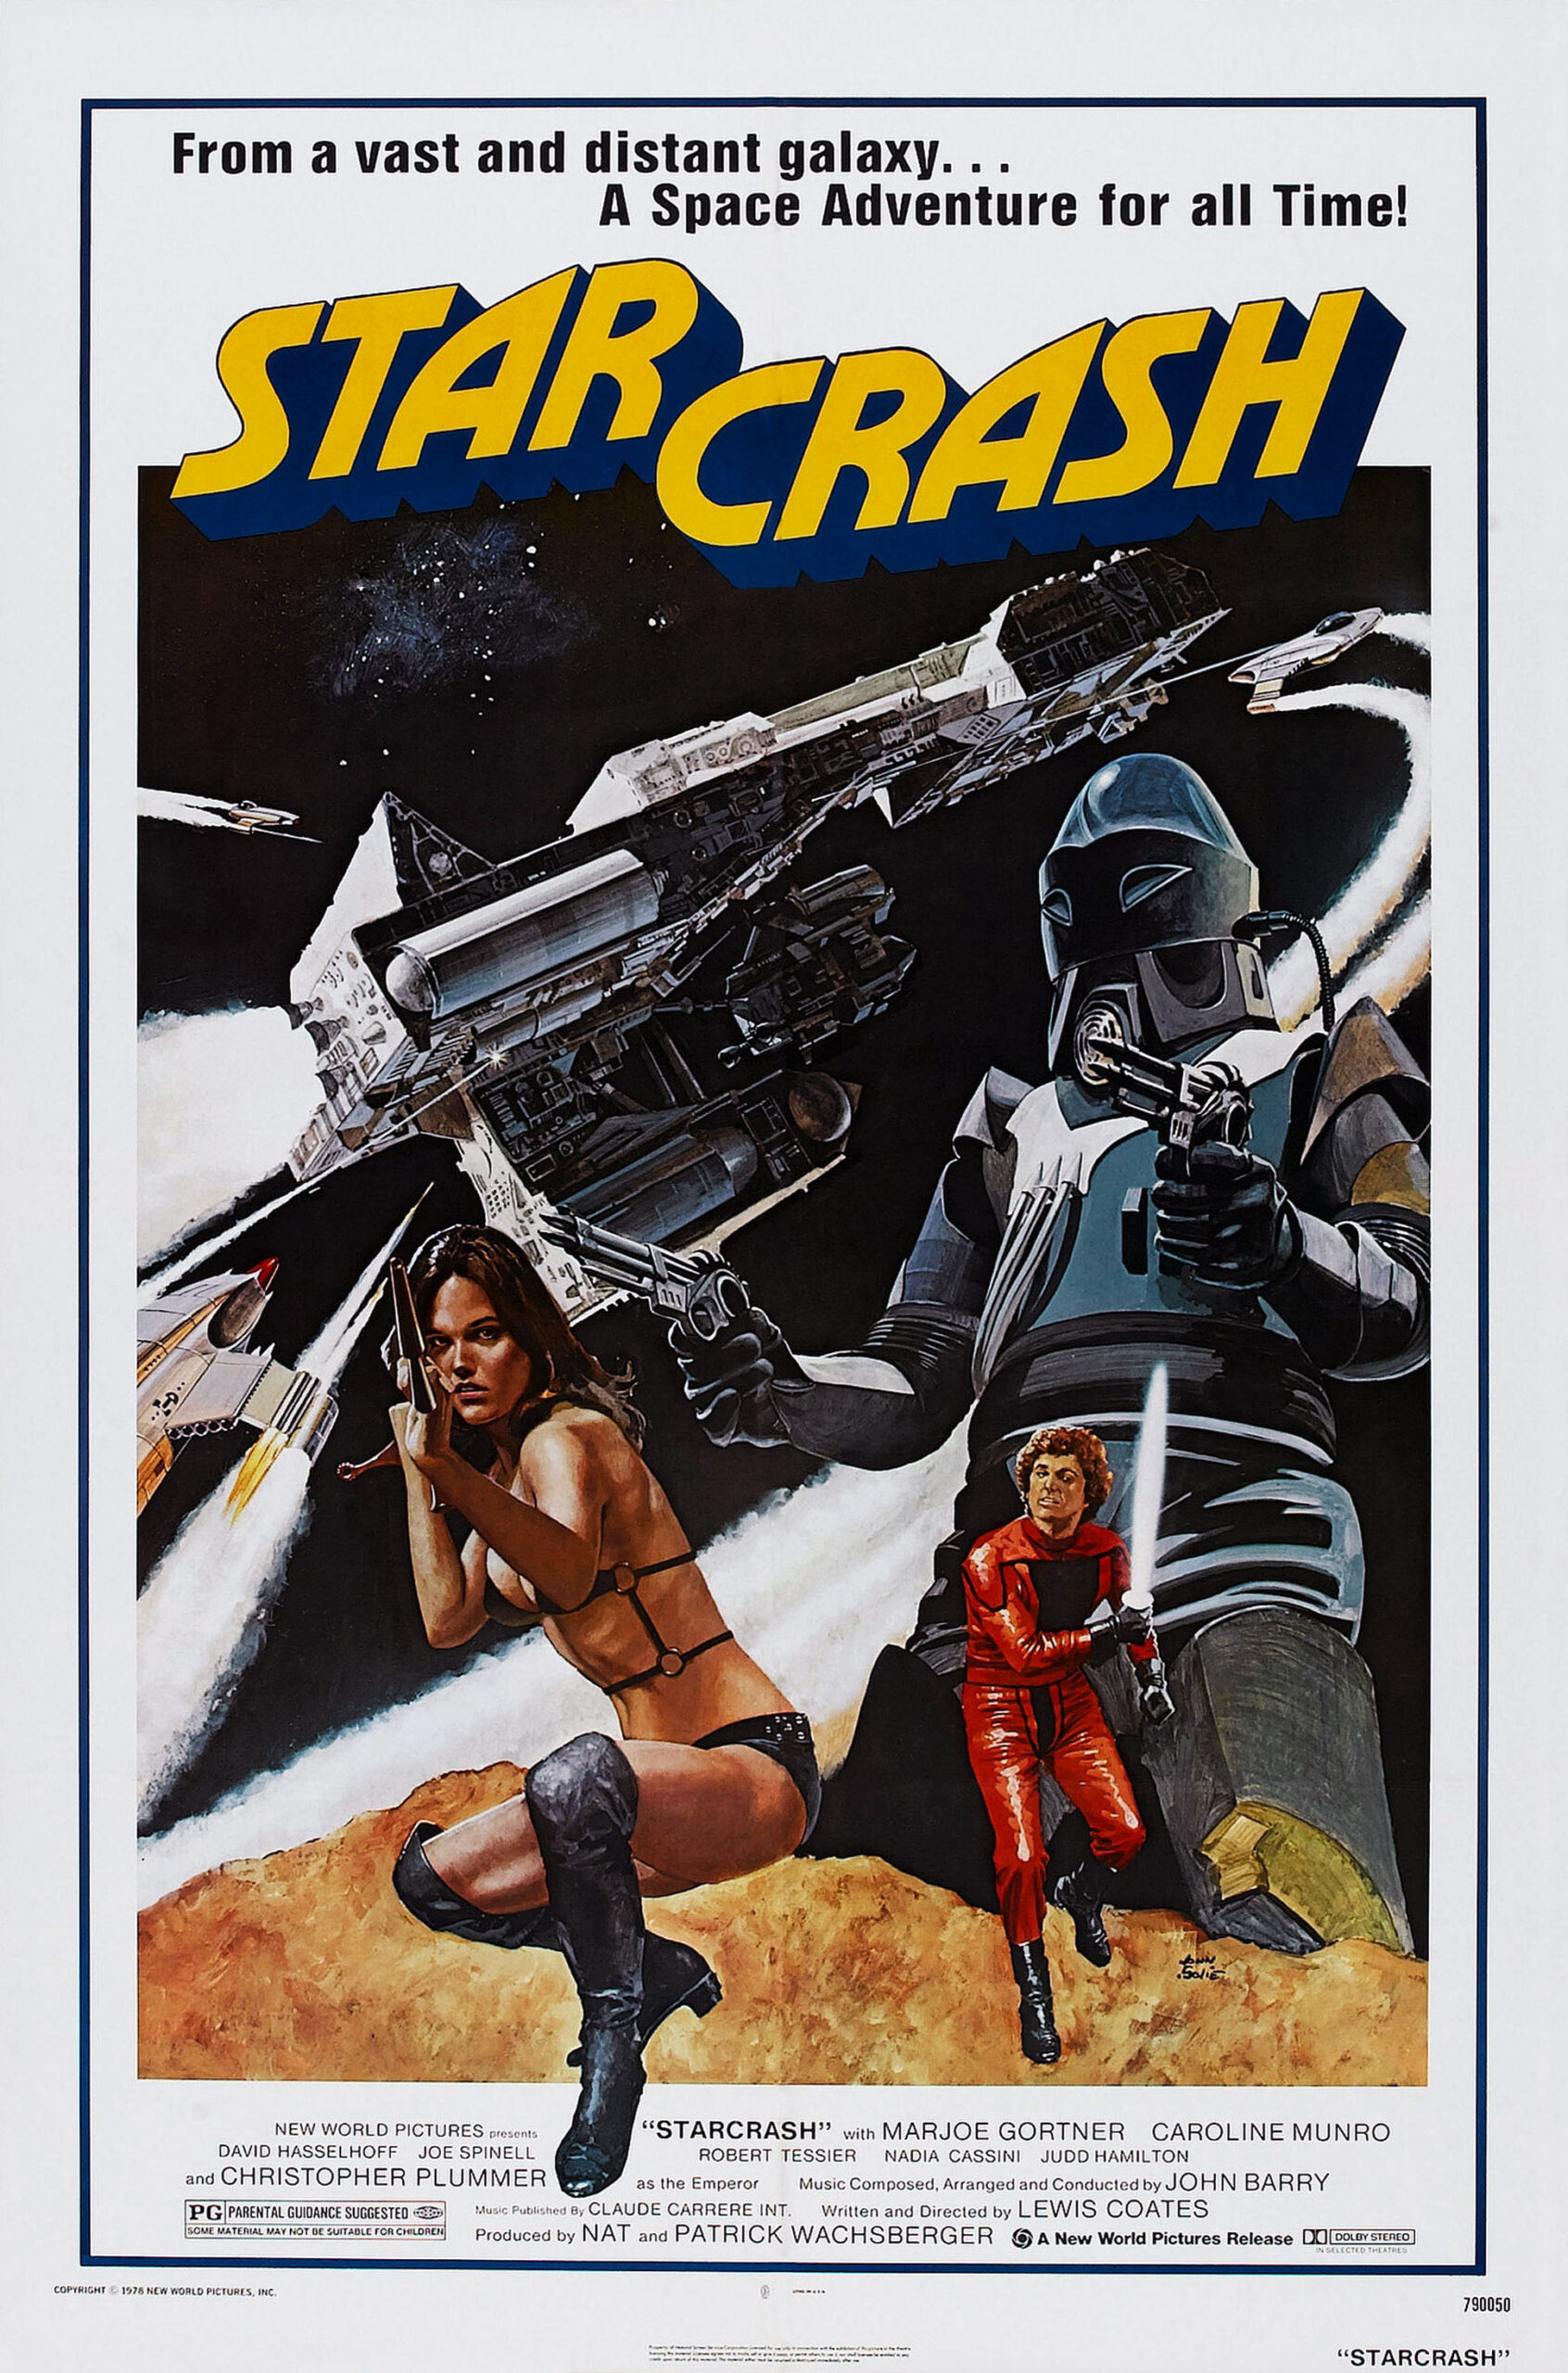 movie poster for the 1979 space opera film "Starcrash." Beneath the film's title, printed in stylized yellow lettering, is an illustration of various characters and things from the film, including a spaceship, the heroine dressed in a leather bikini and boots and holding a laser gun while crouching down, and a large robot carrying two laser blasters.